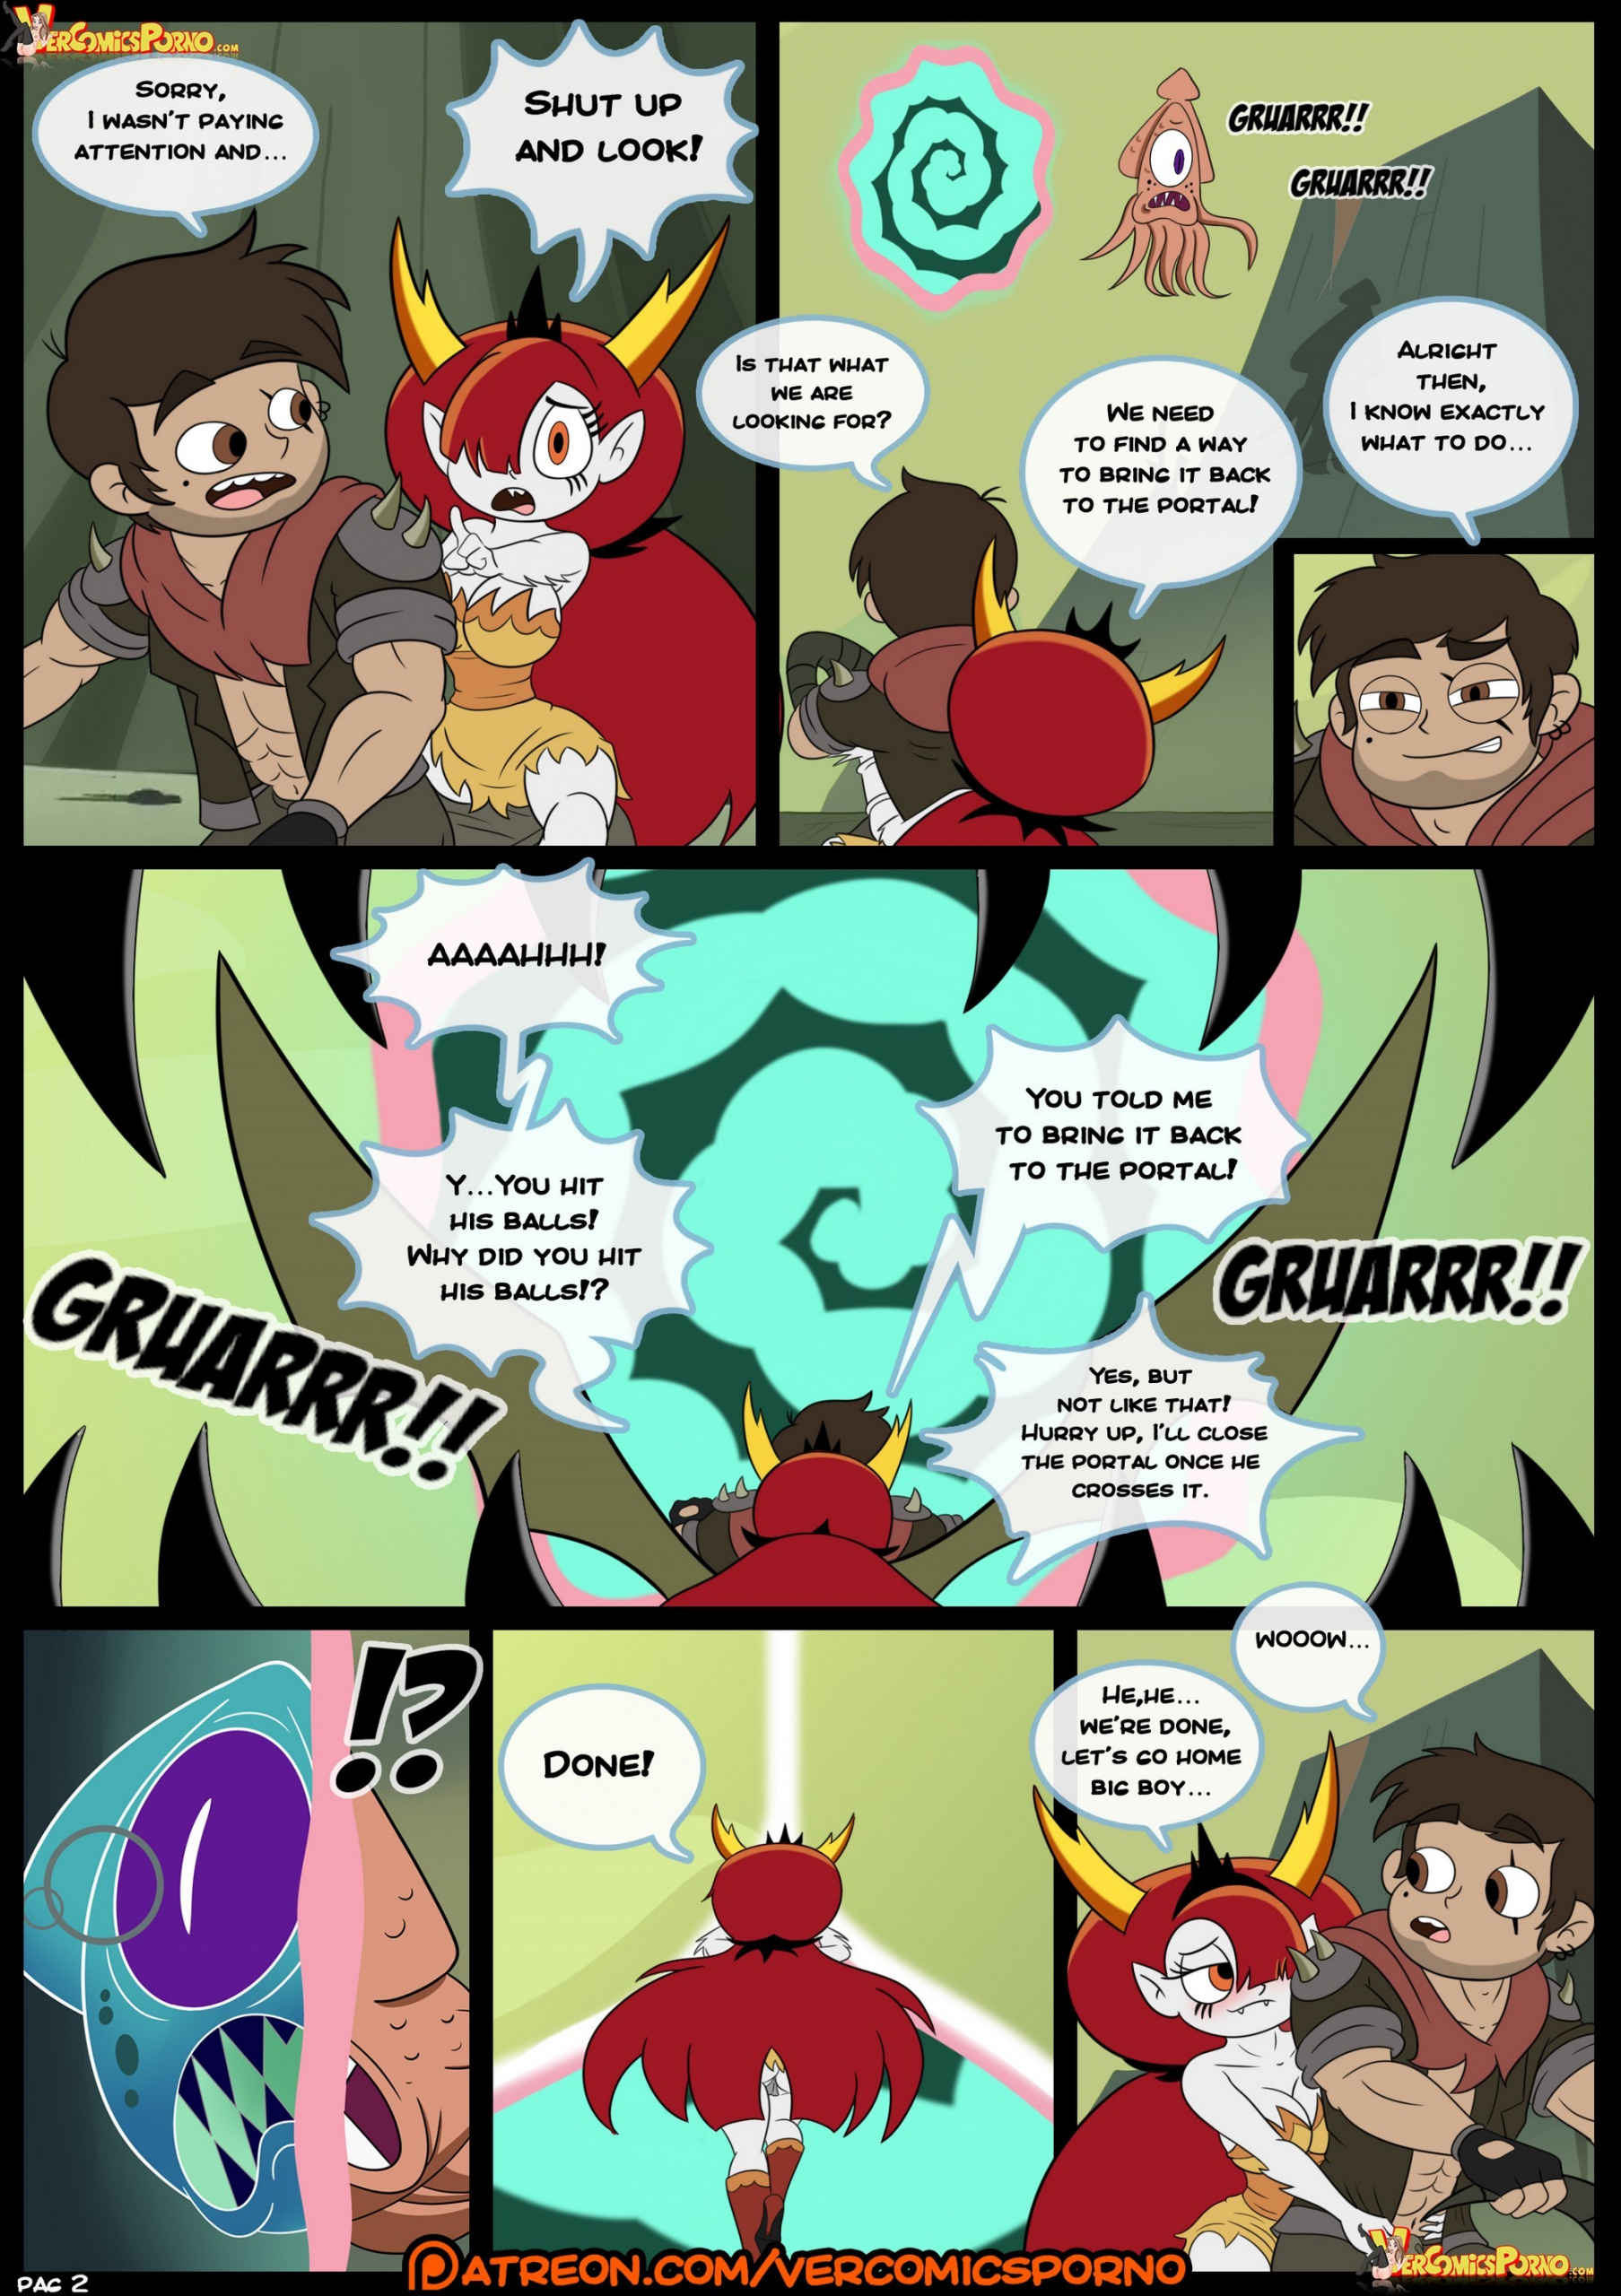 Marco vs The forces of time porn comics Oral sex, Big Tits, Blowjob, cunnilingus, Straight